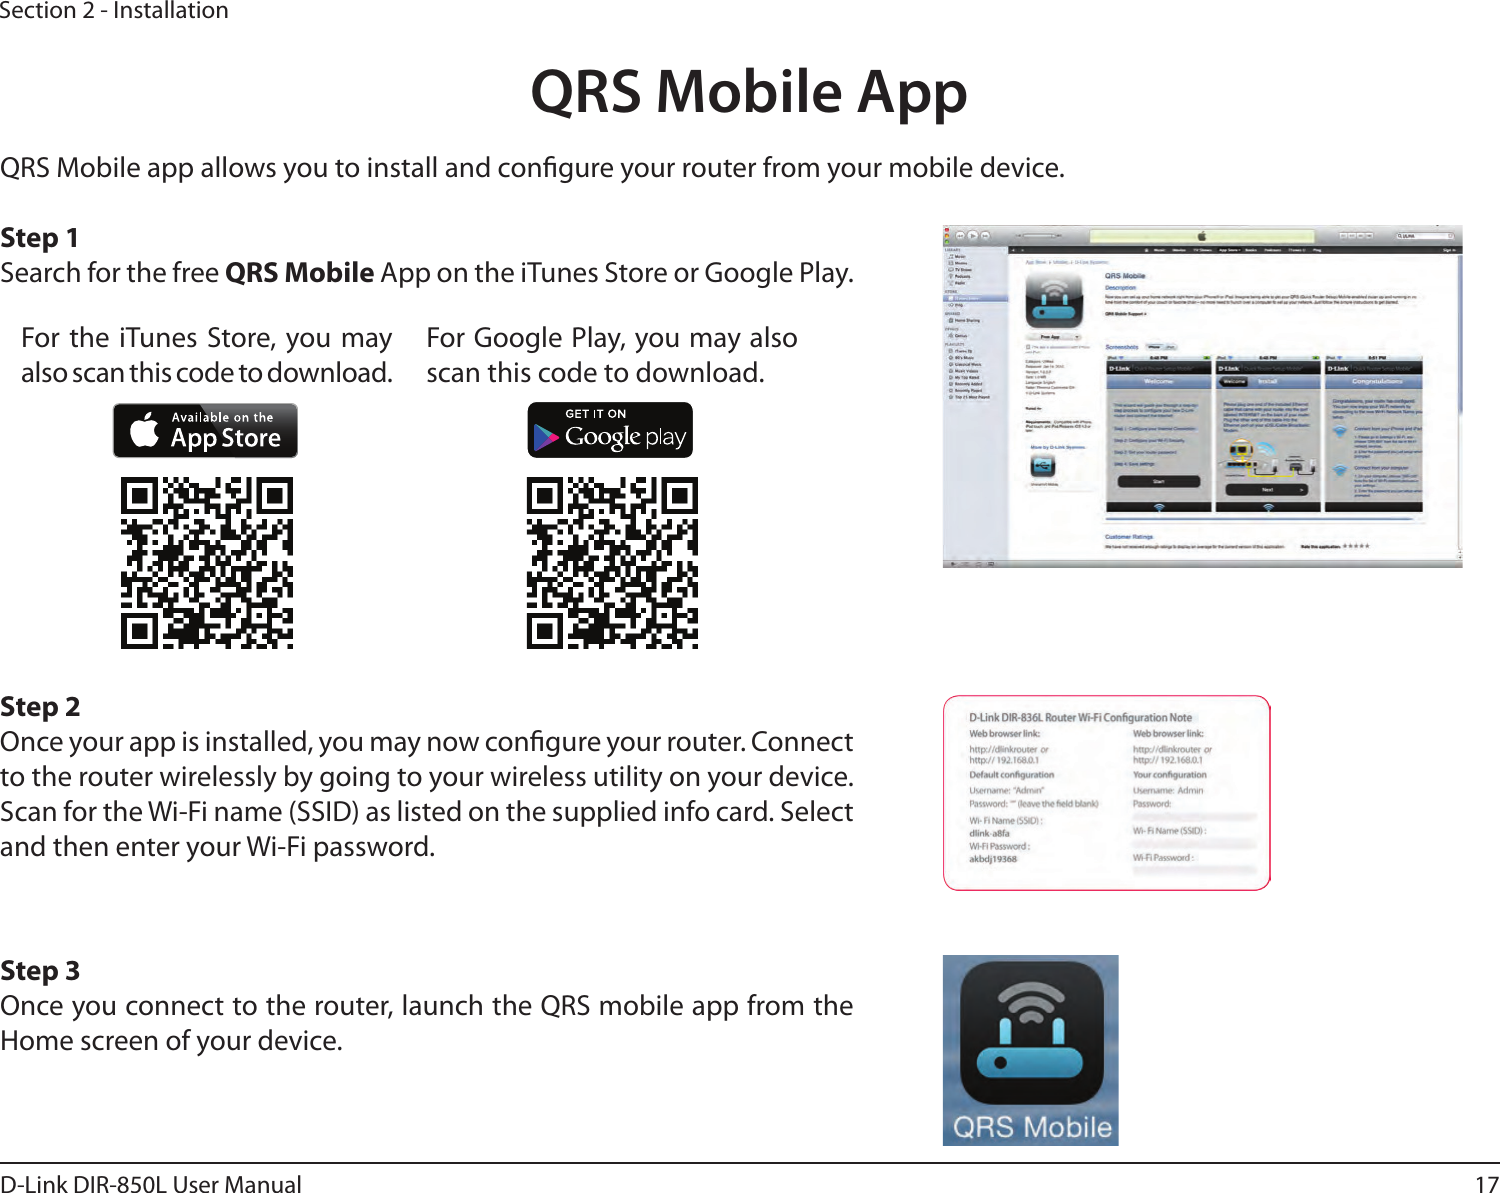 17D-Link DIR-850L User ManualSection 2 - InstallationQRS Mobile AppQRS Mobile app allows you to install and congure your router from your mobile device. Step 1Search for the free QRS Mobile App on the iTunes Store or Google Play.Step 2Once your app is installed, you may now congure your router. Connect to the router wirelessly by going to your wireless utility on your device. Scan for the Wi-Fi name (SSID) as listed on the supplied info card. Select and then enter your Wi-Fi password.Step 3Once you connect to the router, launch the QRS mobile app from the Home screen of your device.For the iTunes Store, you may also scan this code to download.For Google Play, you may also scan this code to download.